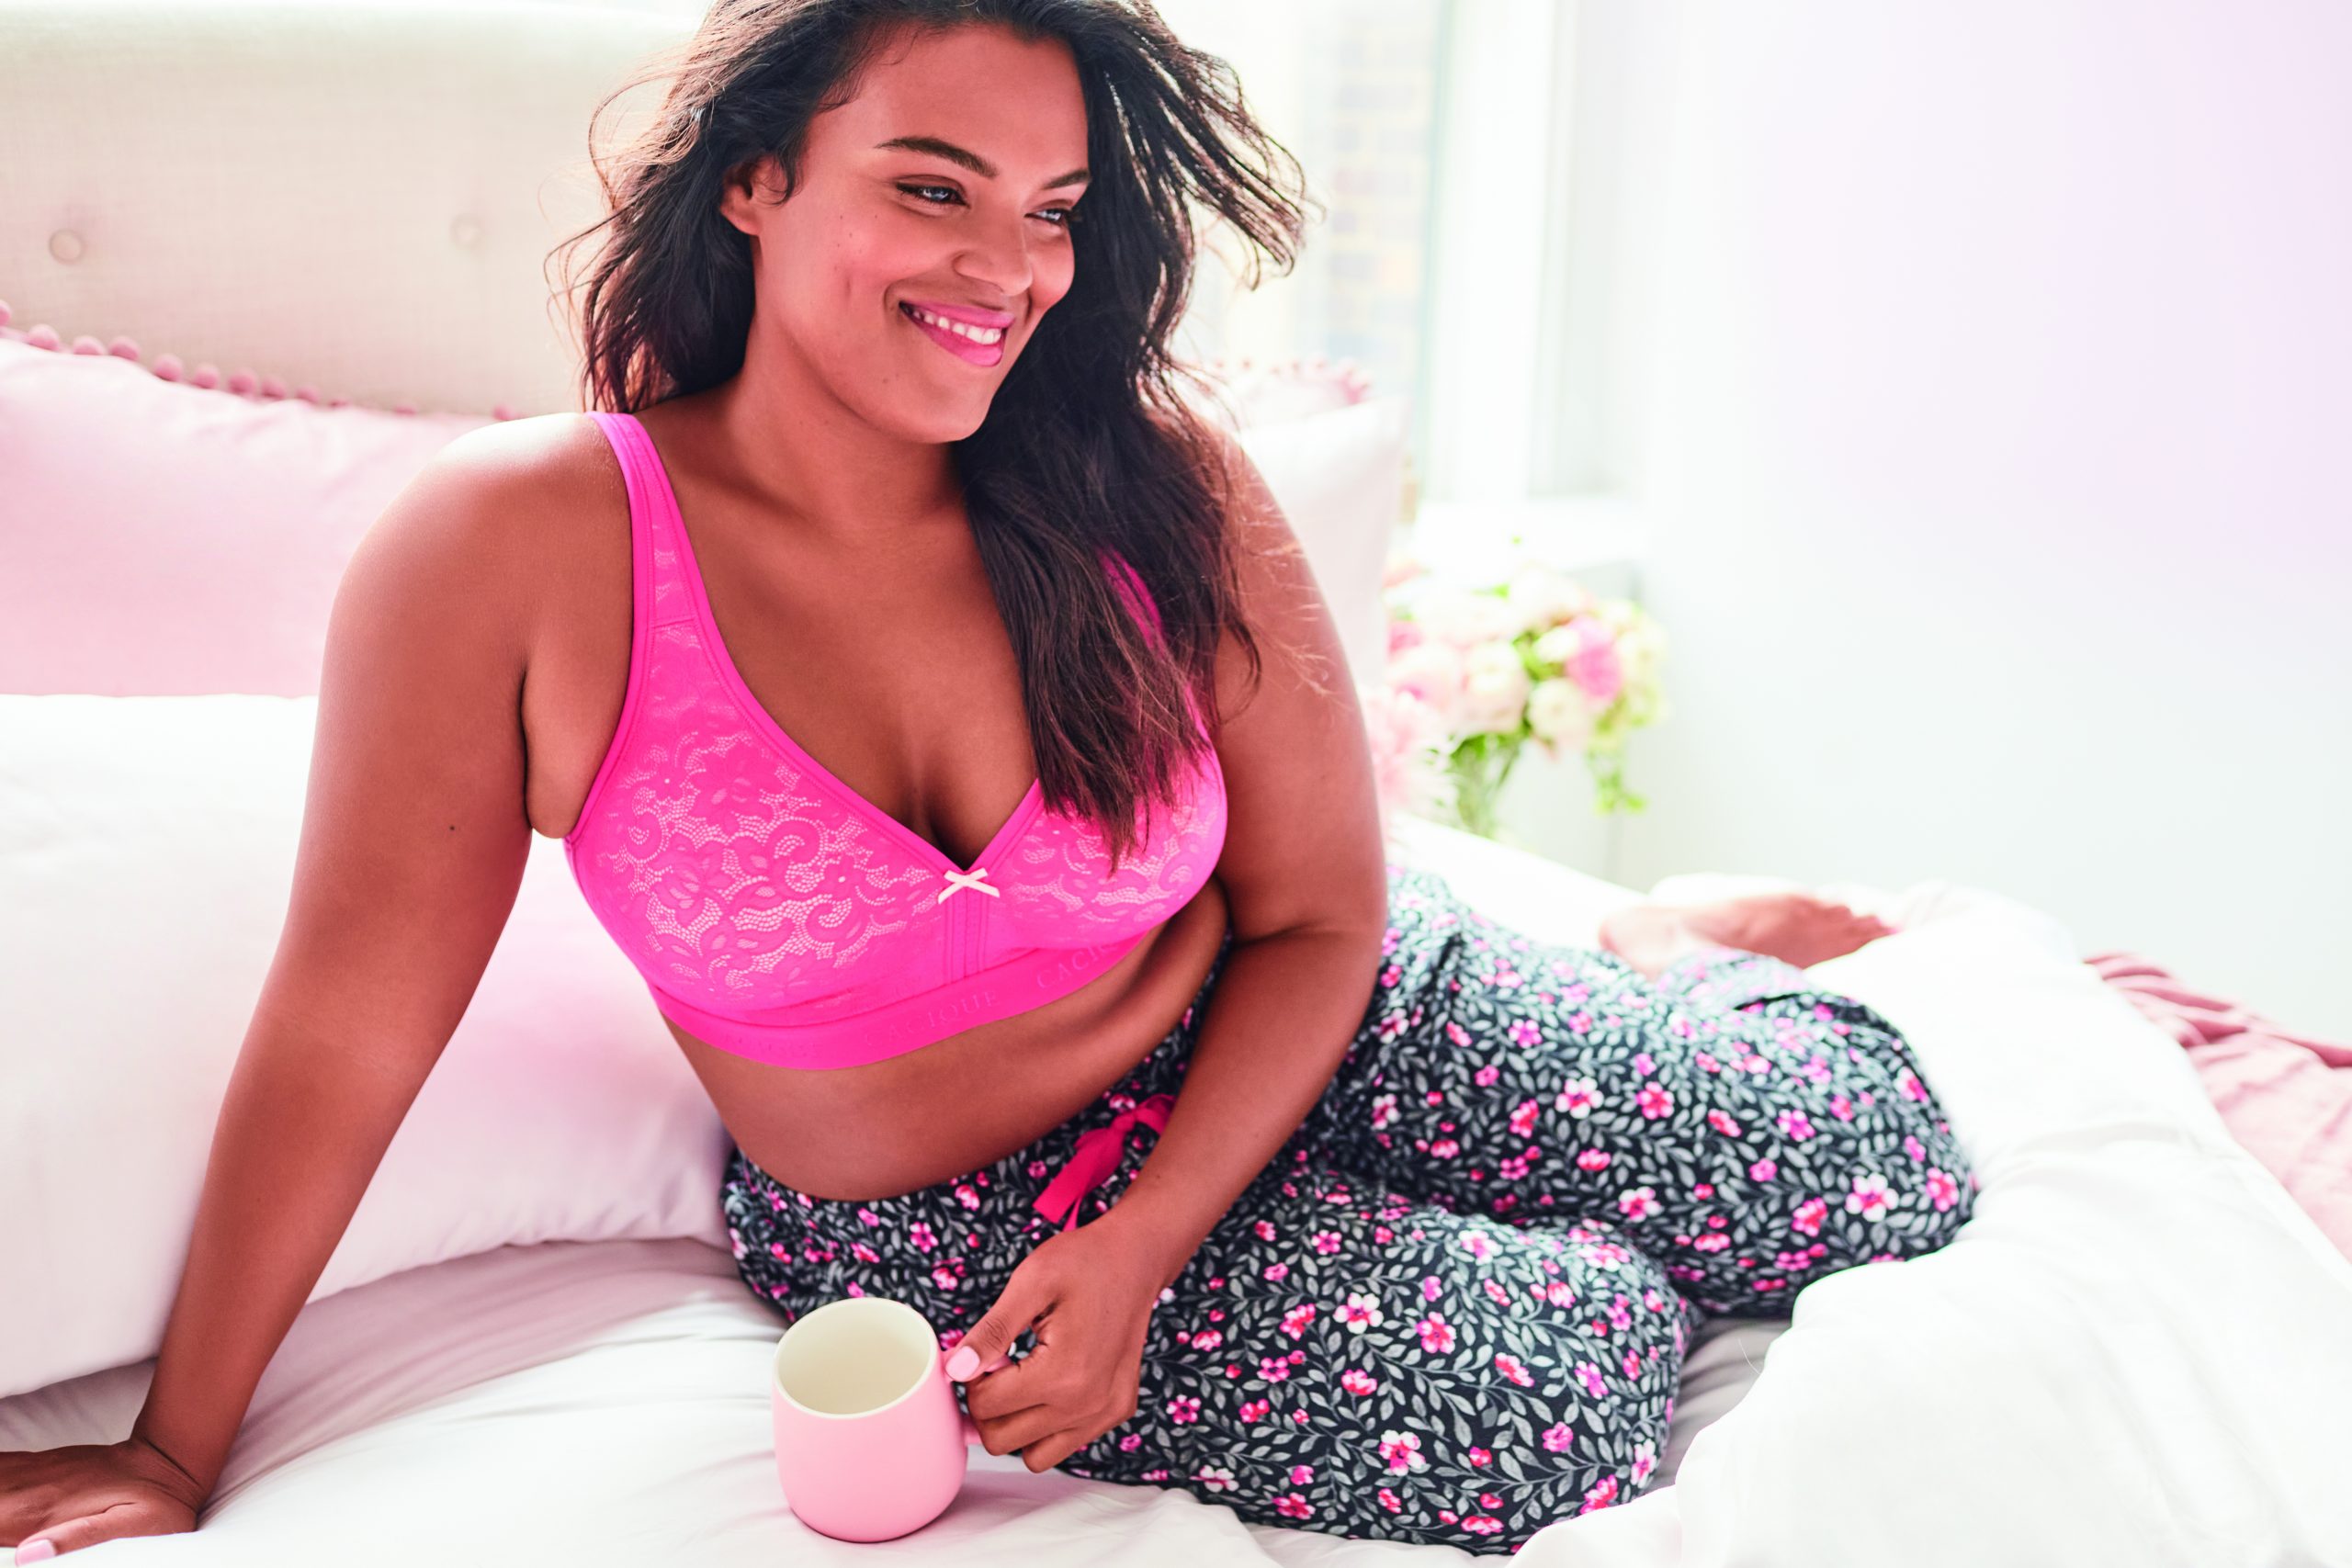 Lane Bryant - Lela Rose + Cacique = a match made in (boudoir) heaven. Meet  the exclusive collection here